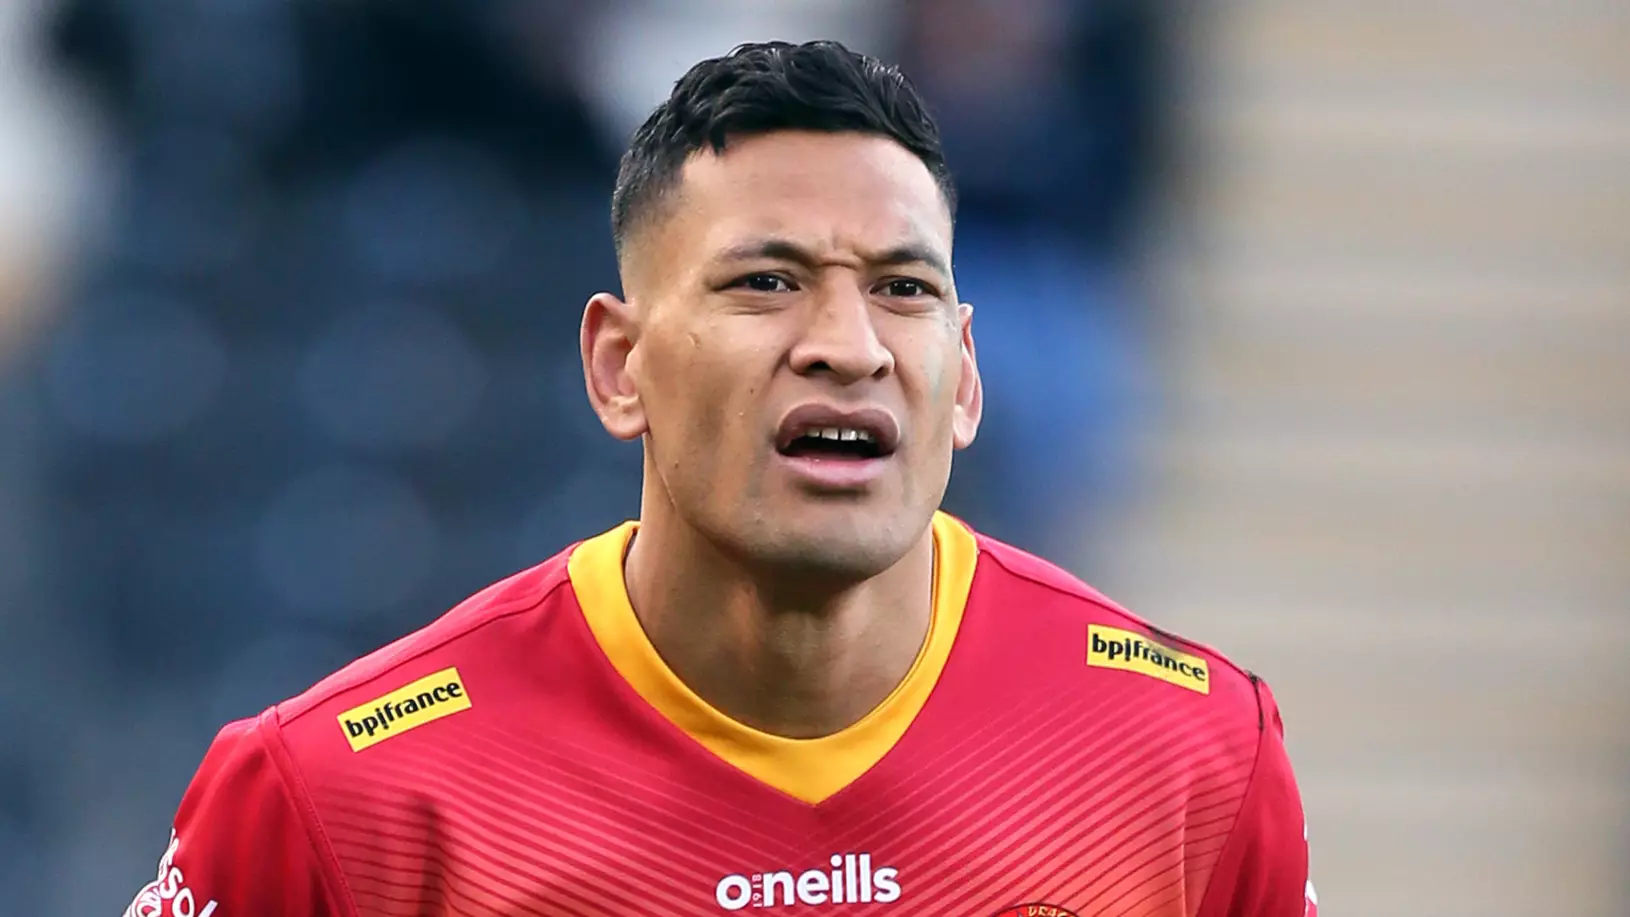 Israel Folau Cops Criticism For Not Taking A Knee Before Match